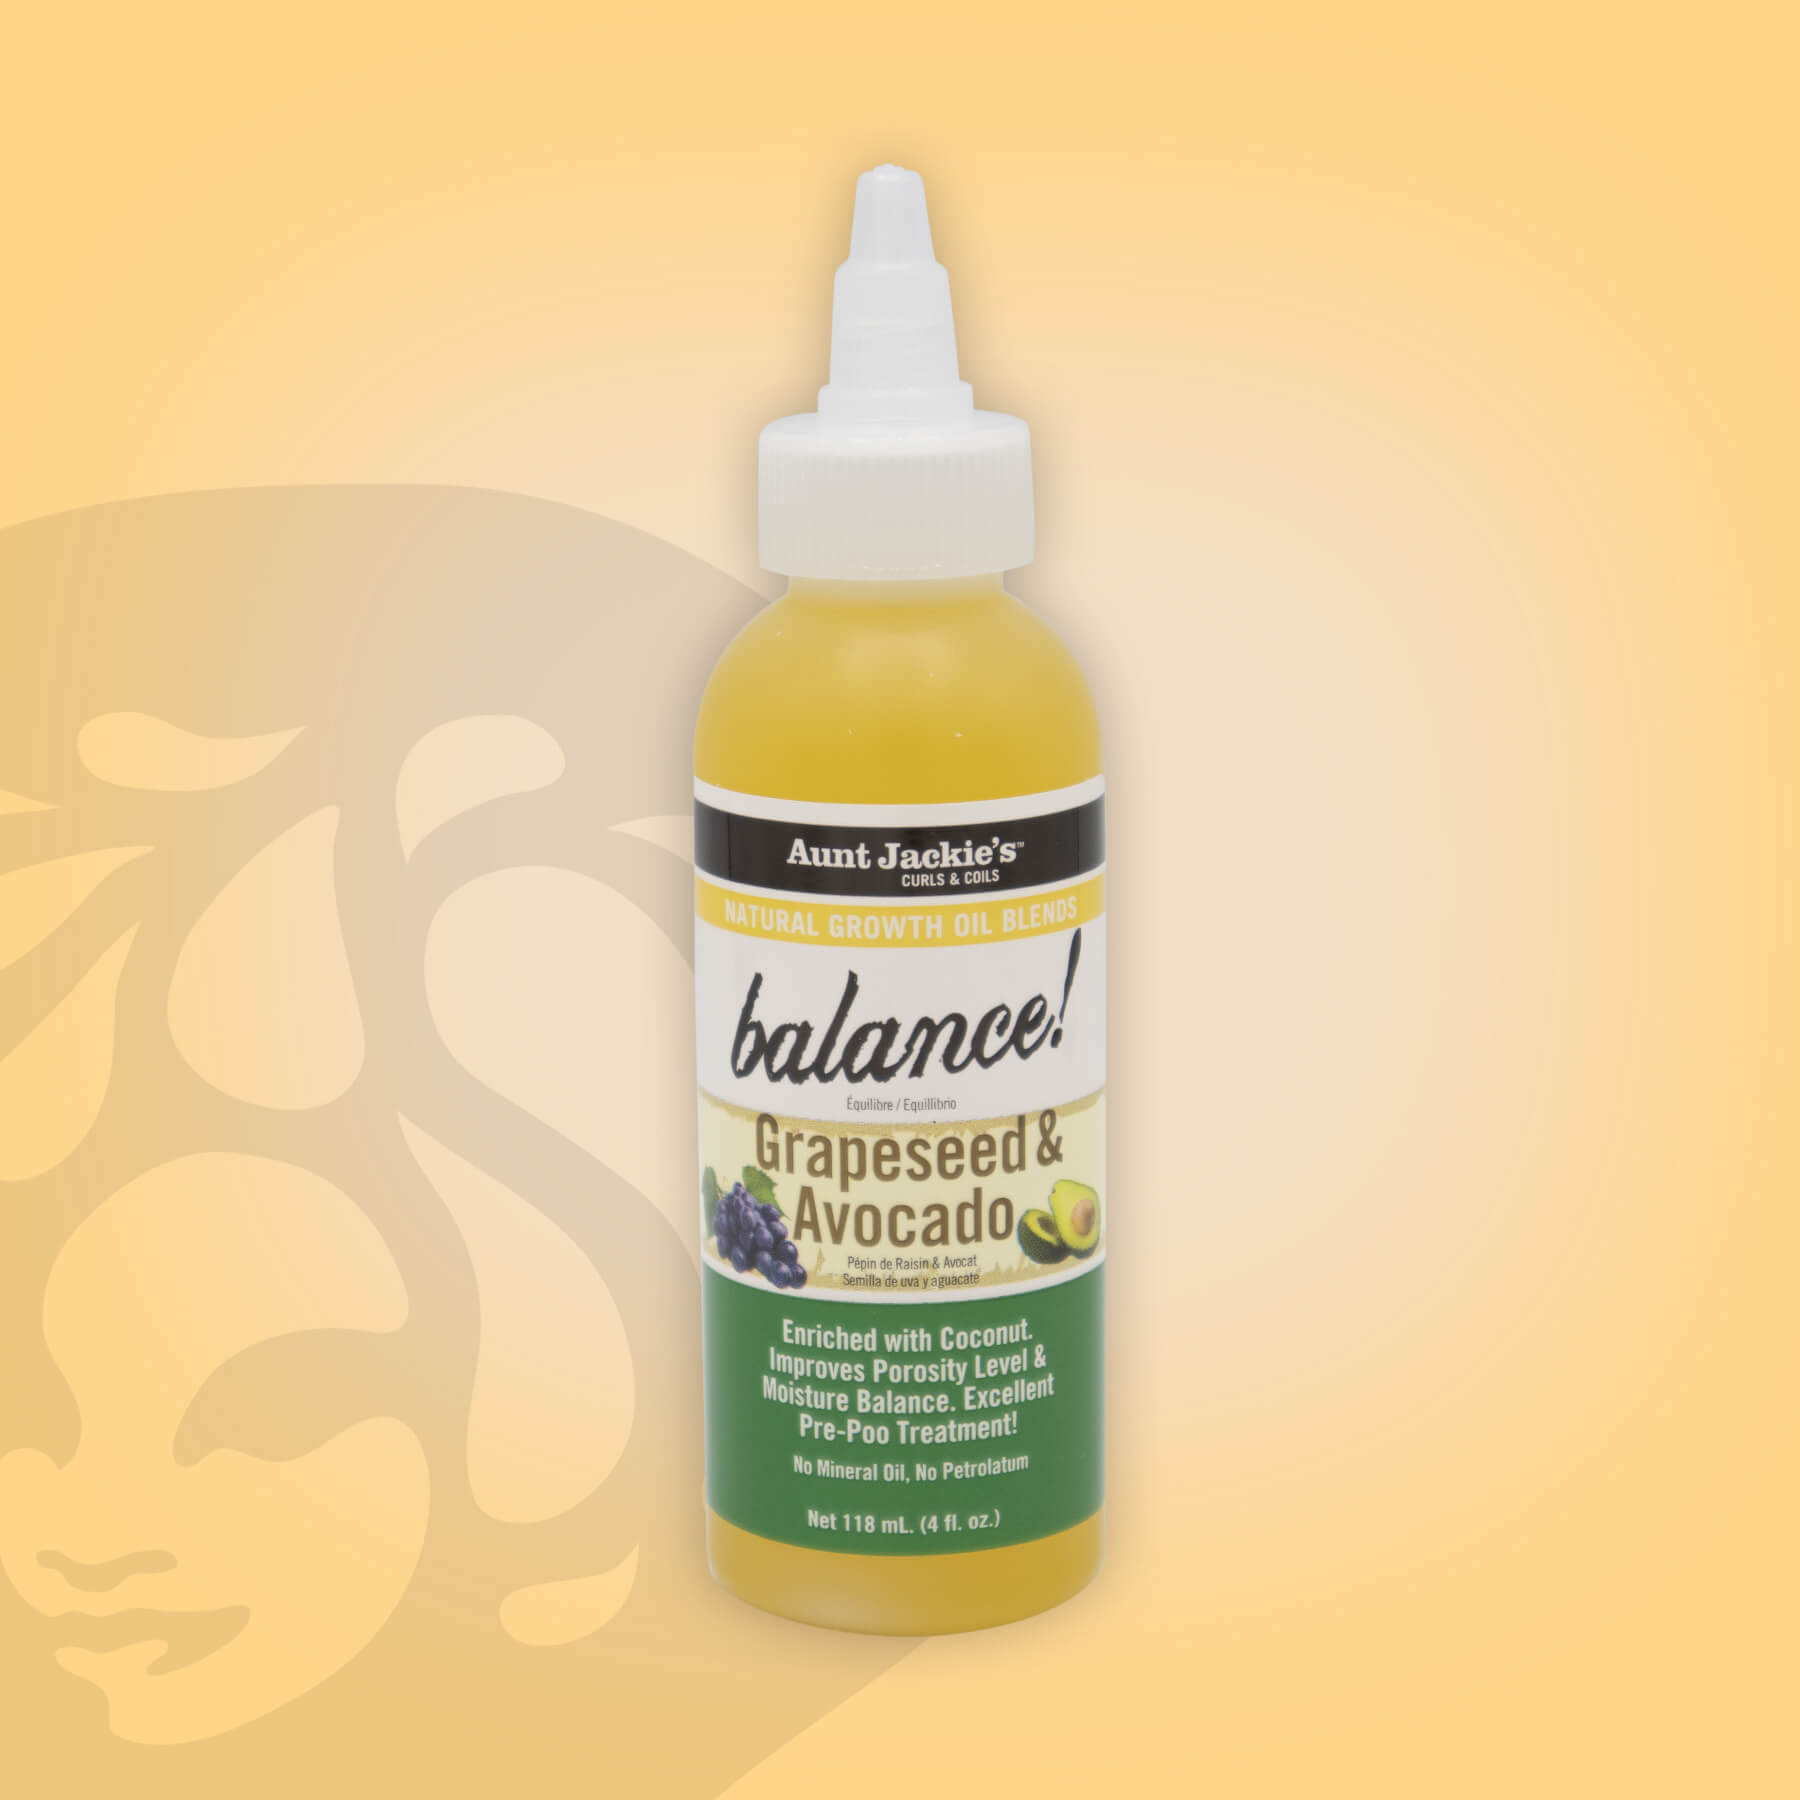 Aunt Jackie's Balance Grapeseed Avocado Oil